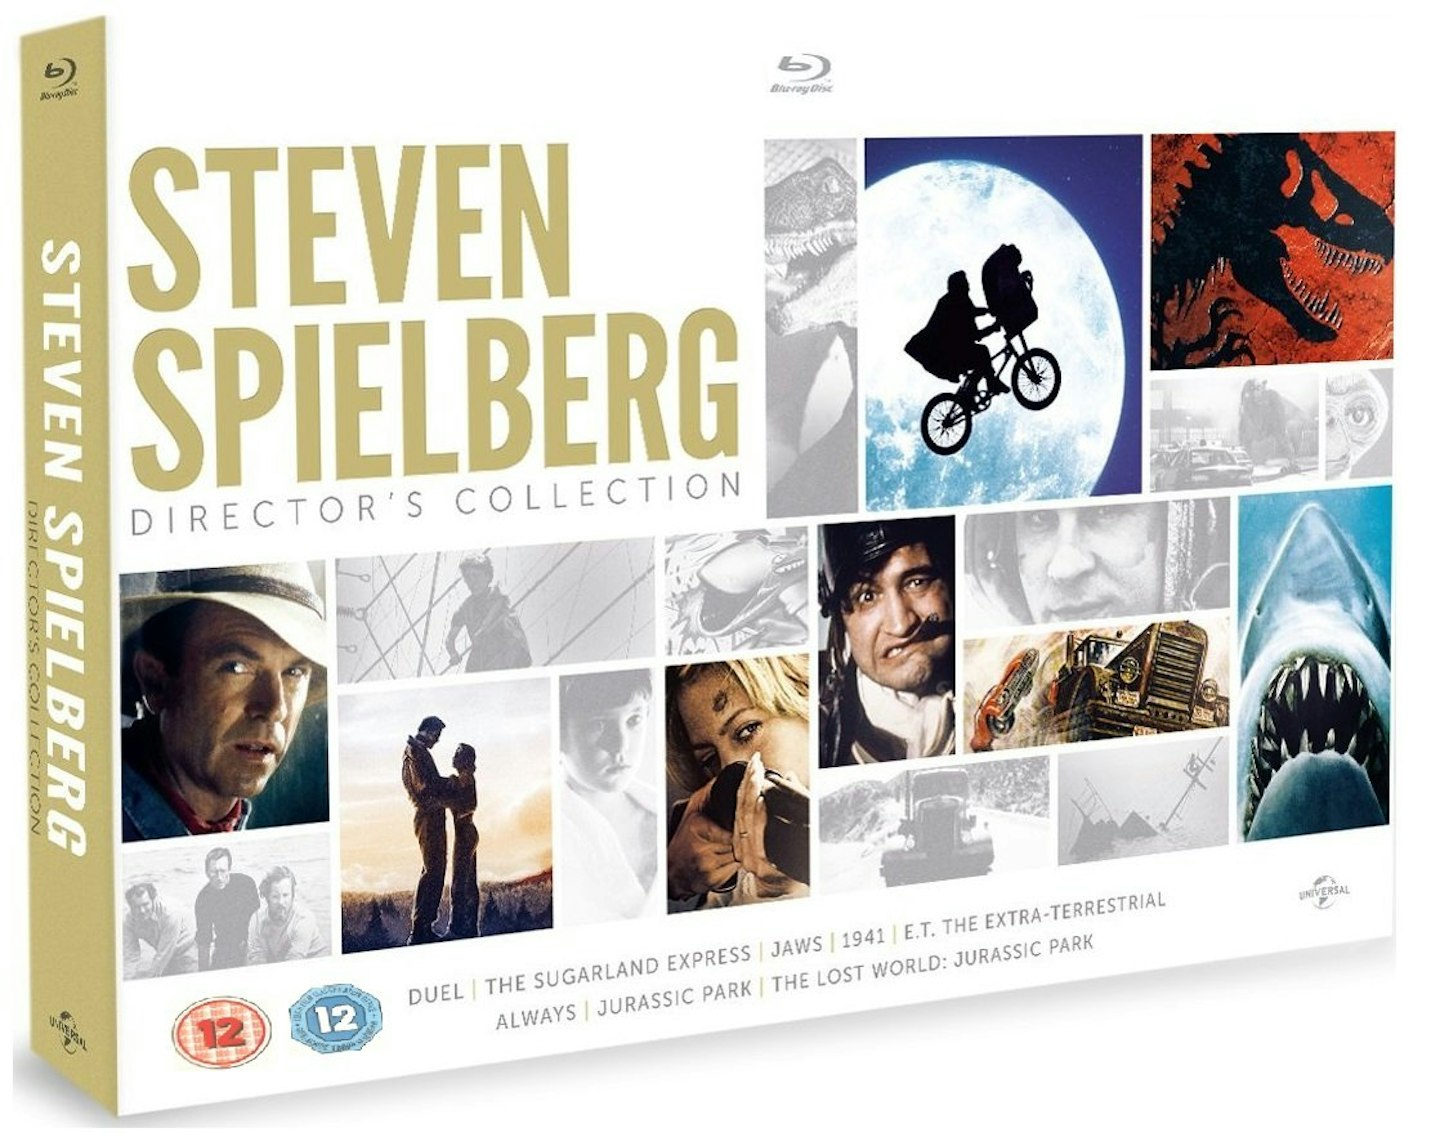 Steven Spielberg Director's Collection, Blu-ray